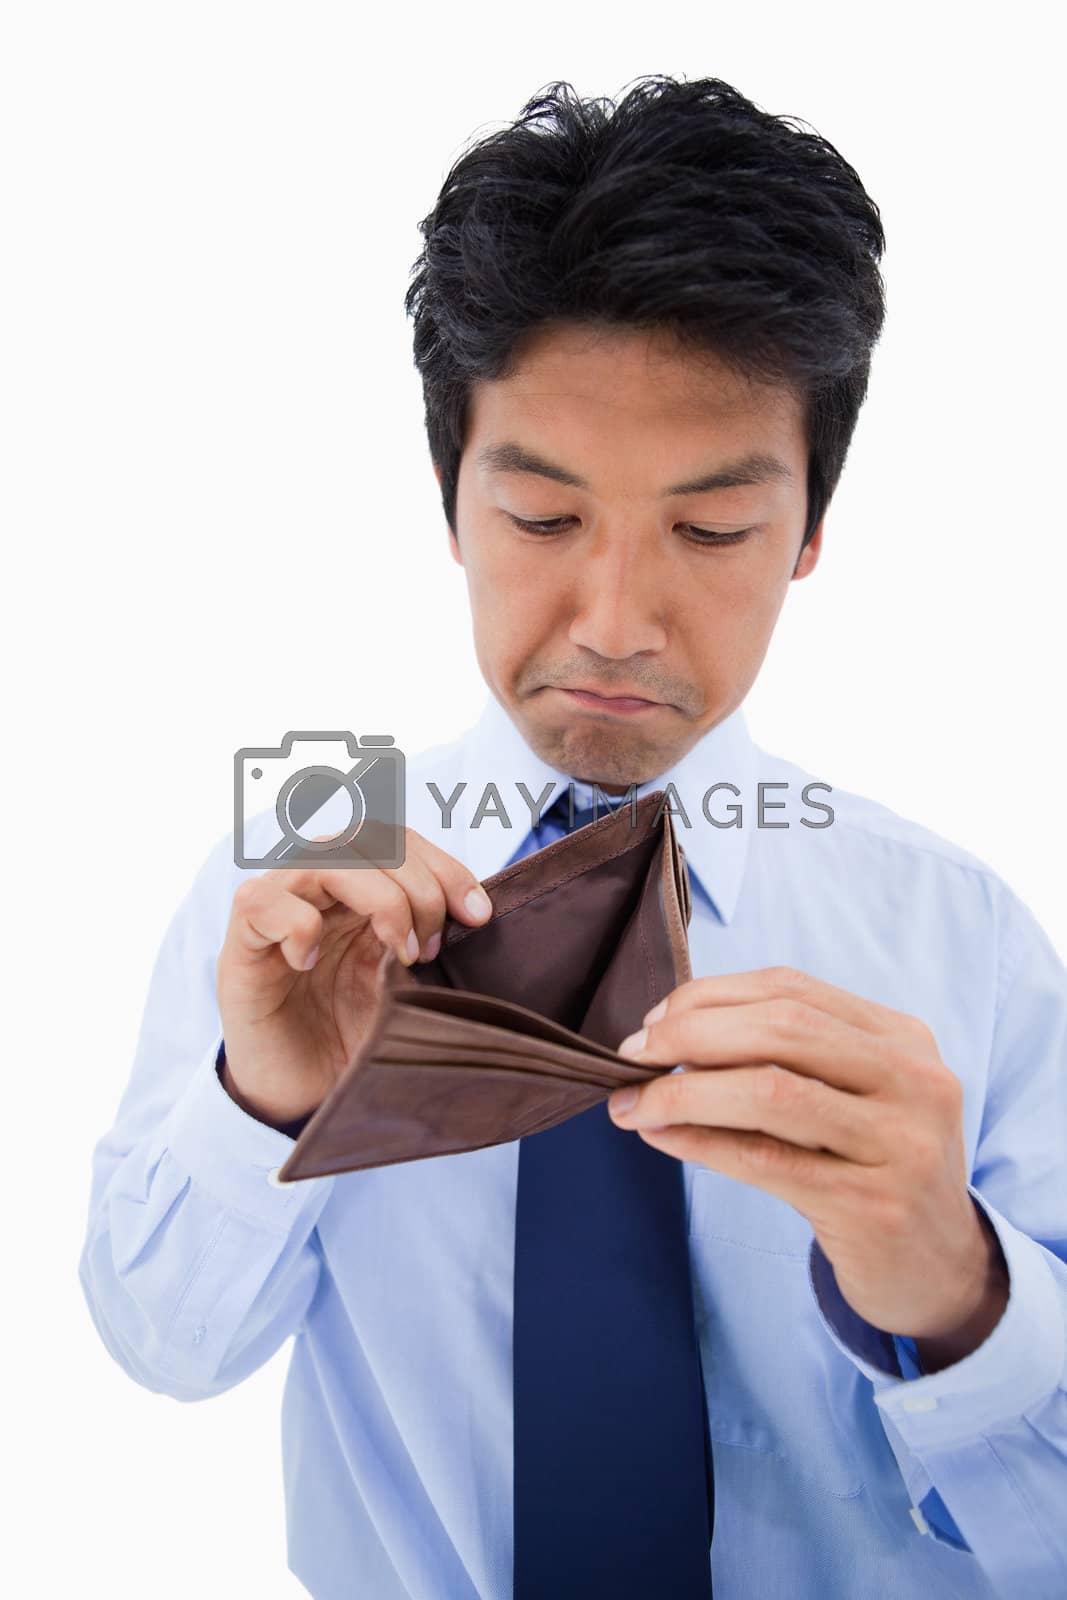 Royalty free image of Portrait of a sad businessman showing his empty wallet by Wavebreakmedia